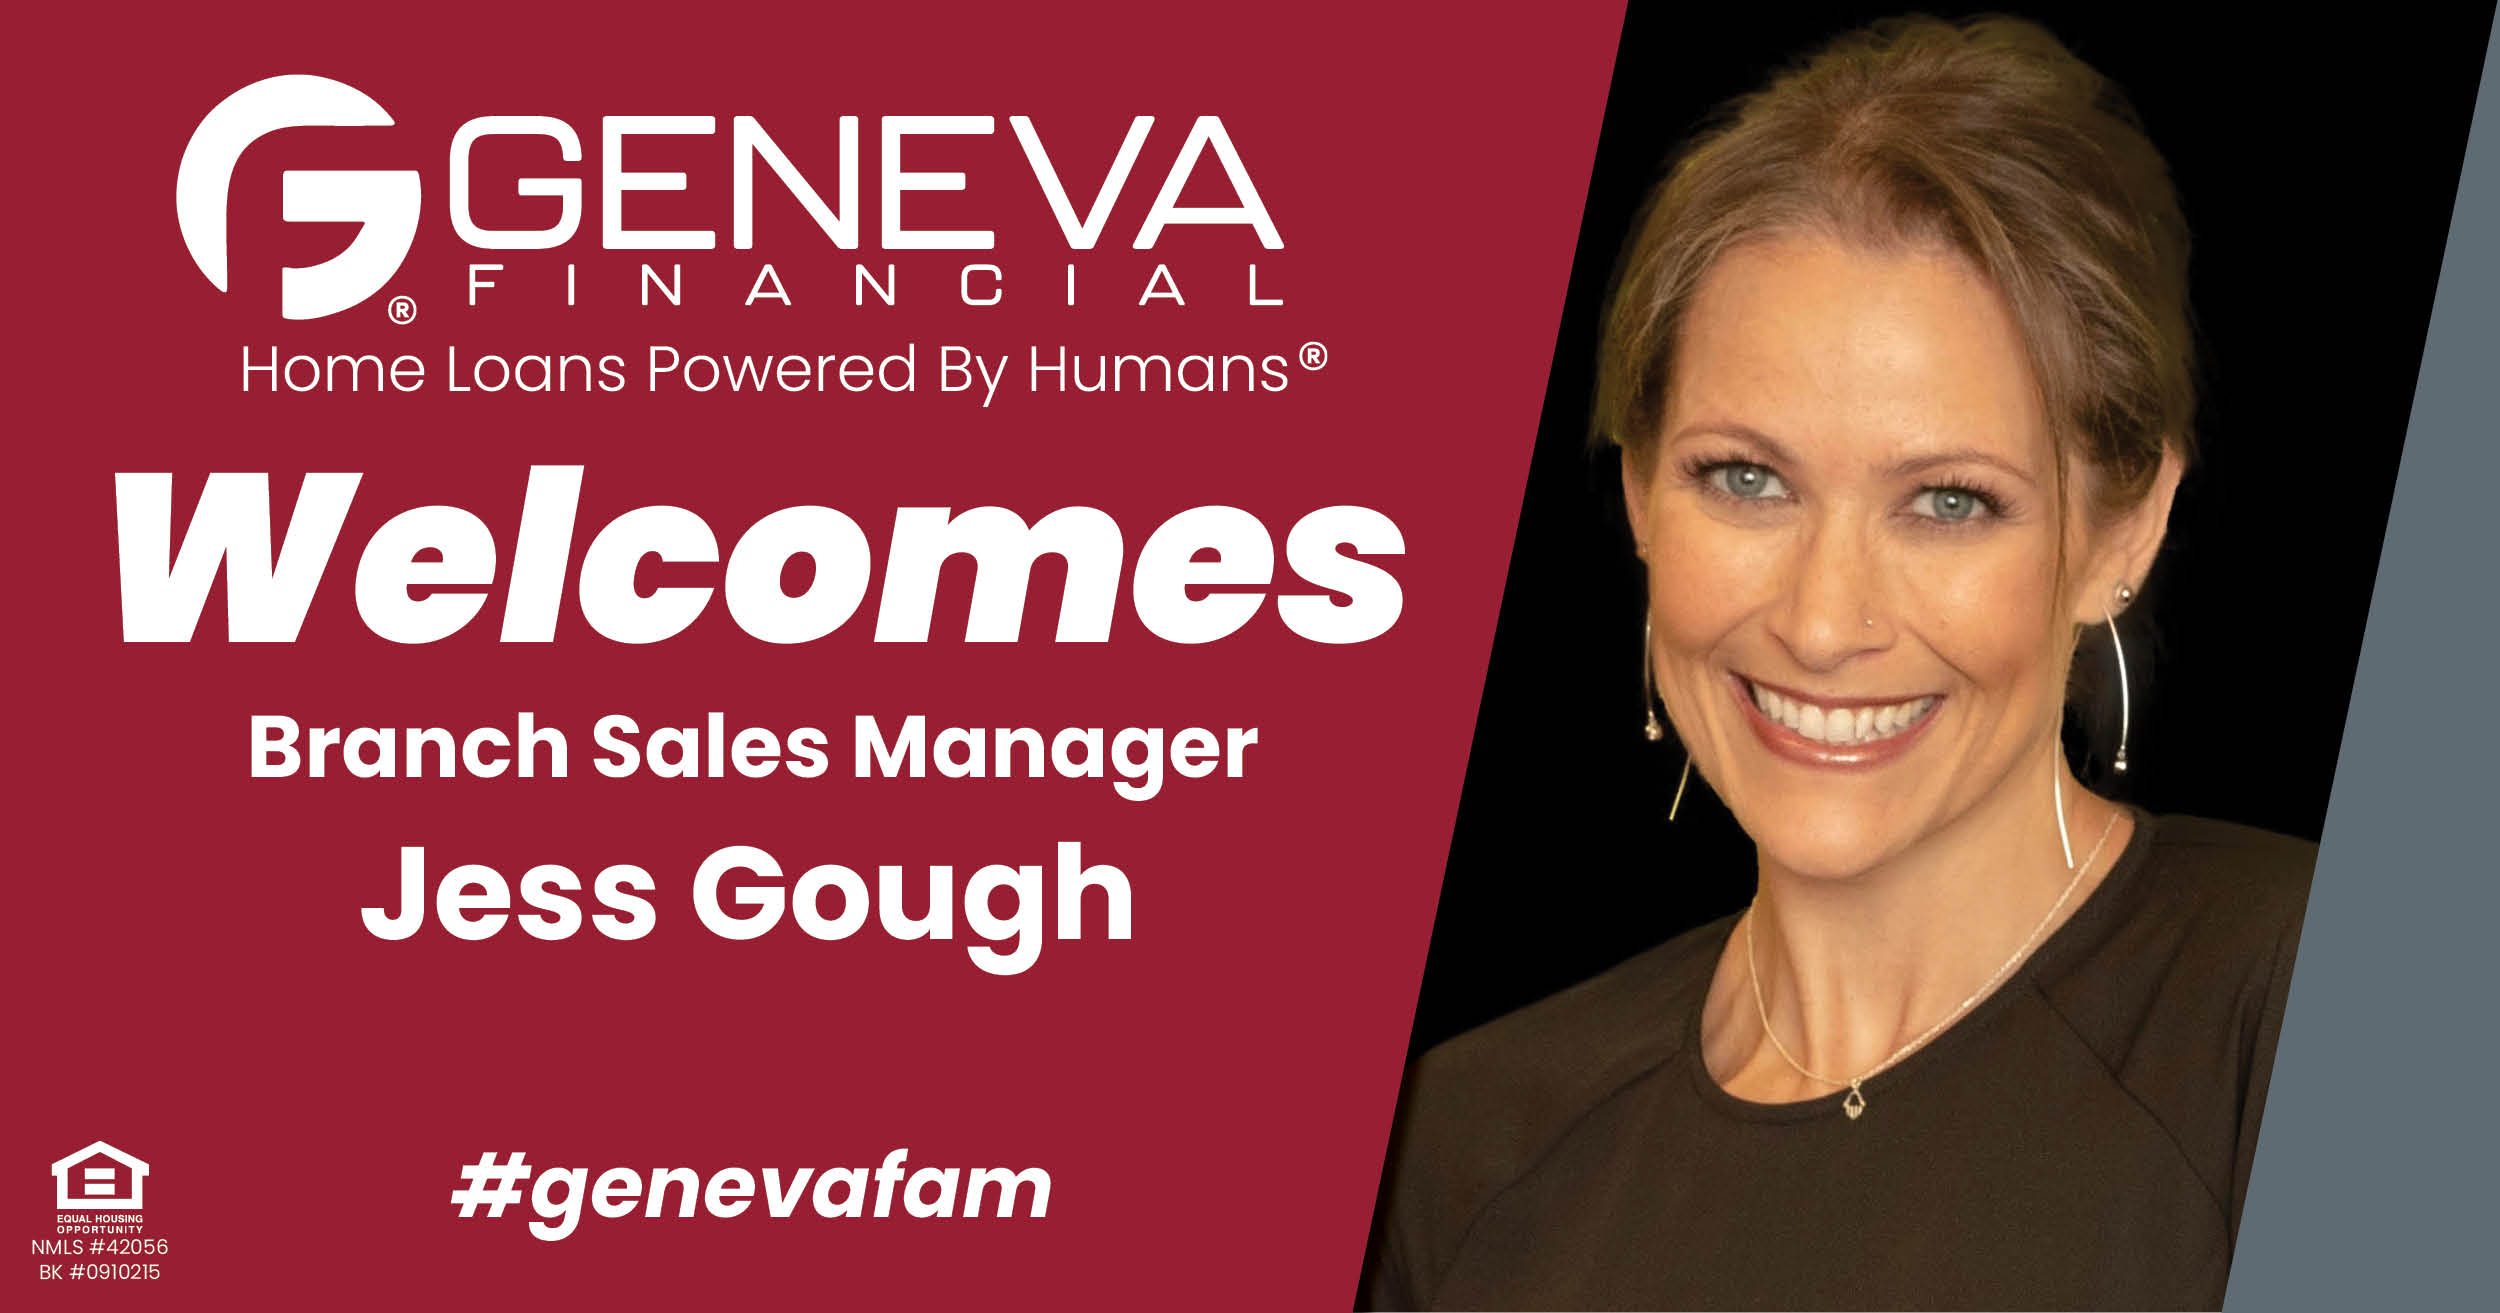 Geneva Financial Welcomes New Branch Sales Manager Jess Gough to Panama City, FL – Home Loans Powered by Humans®.